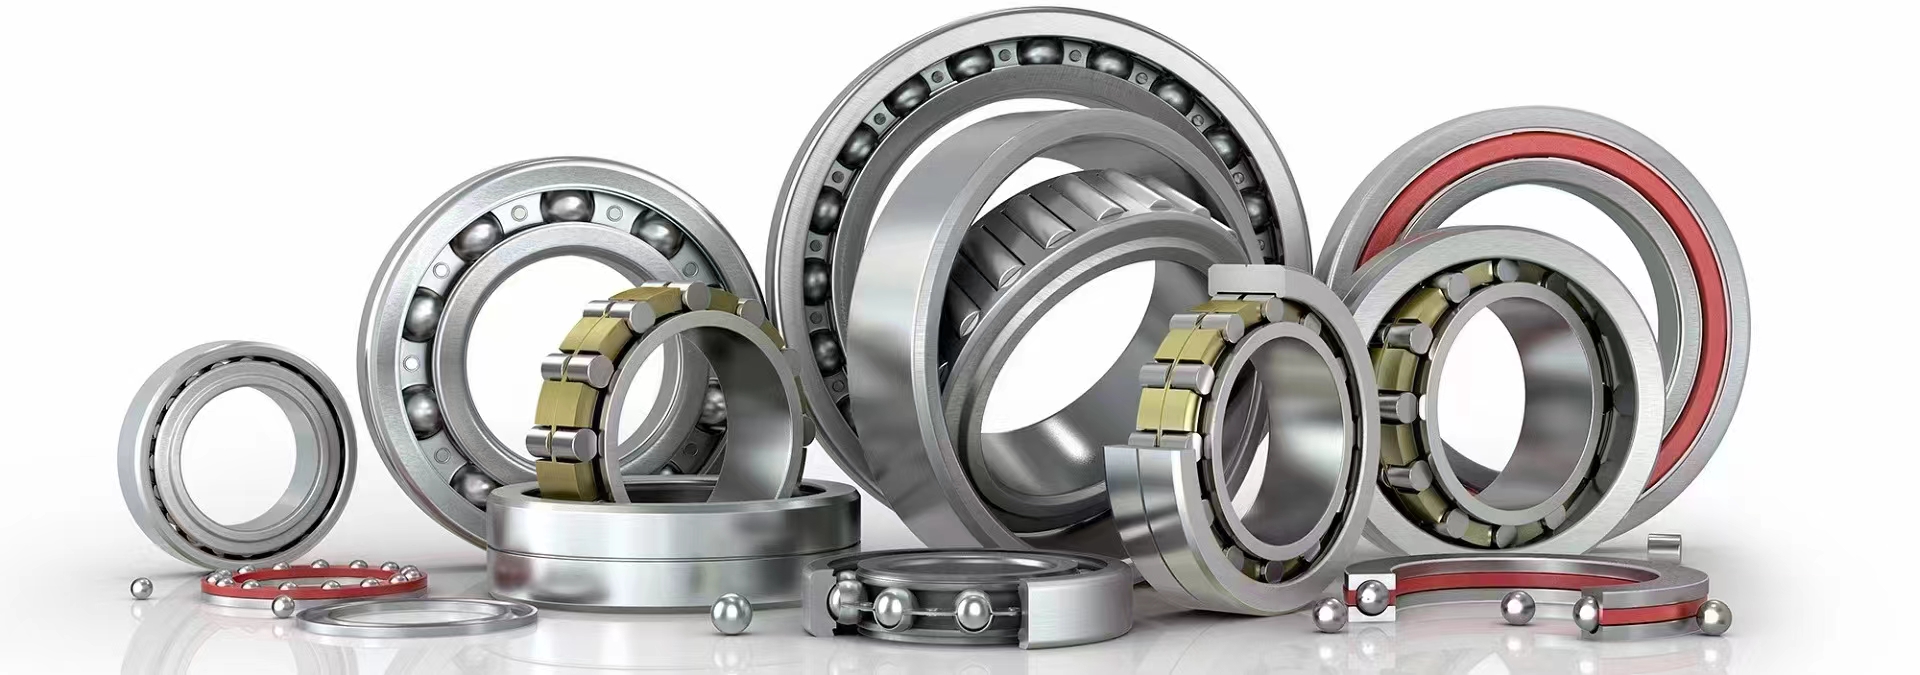 What is the phenomenon and solution of bearing overheating?